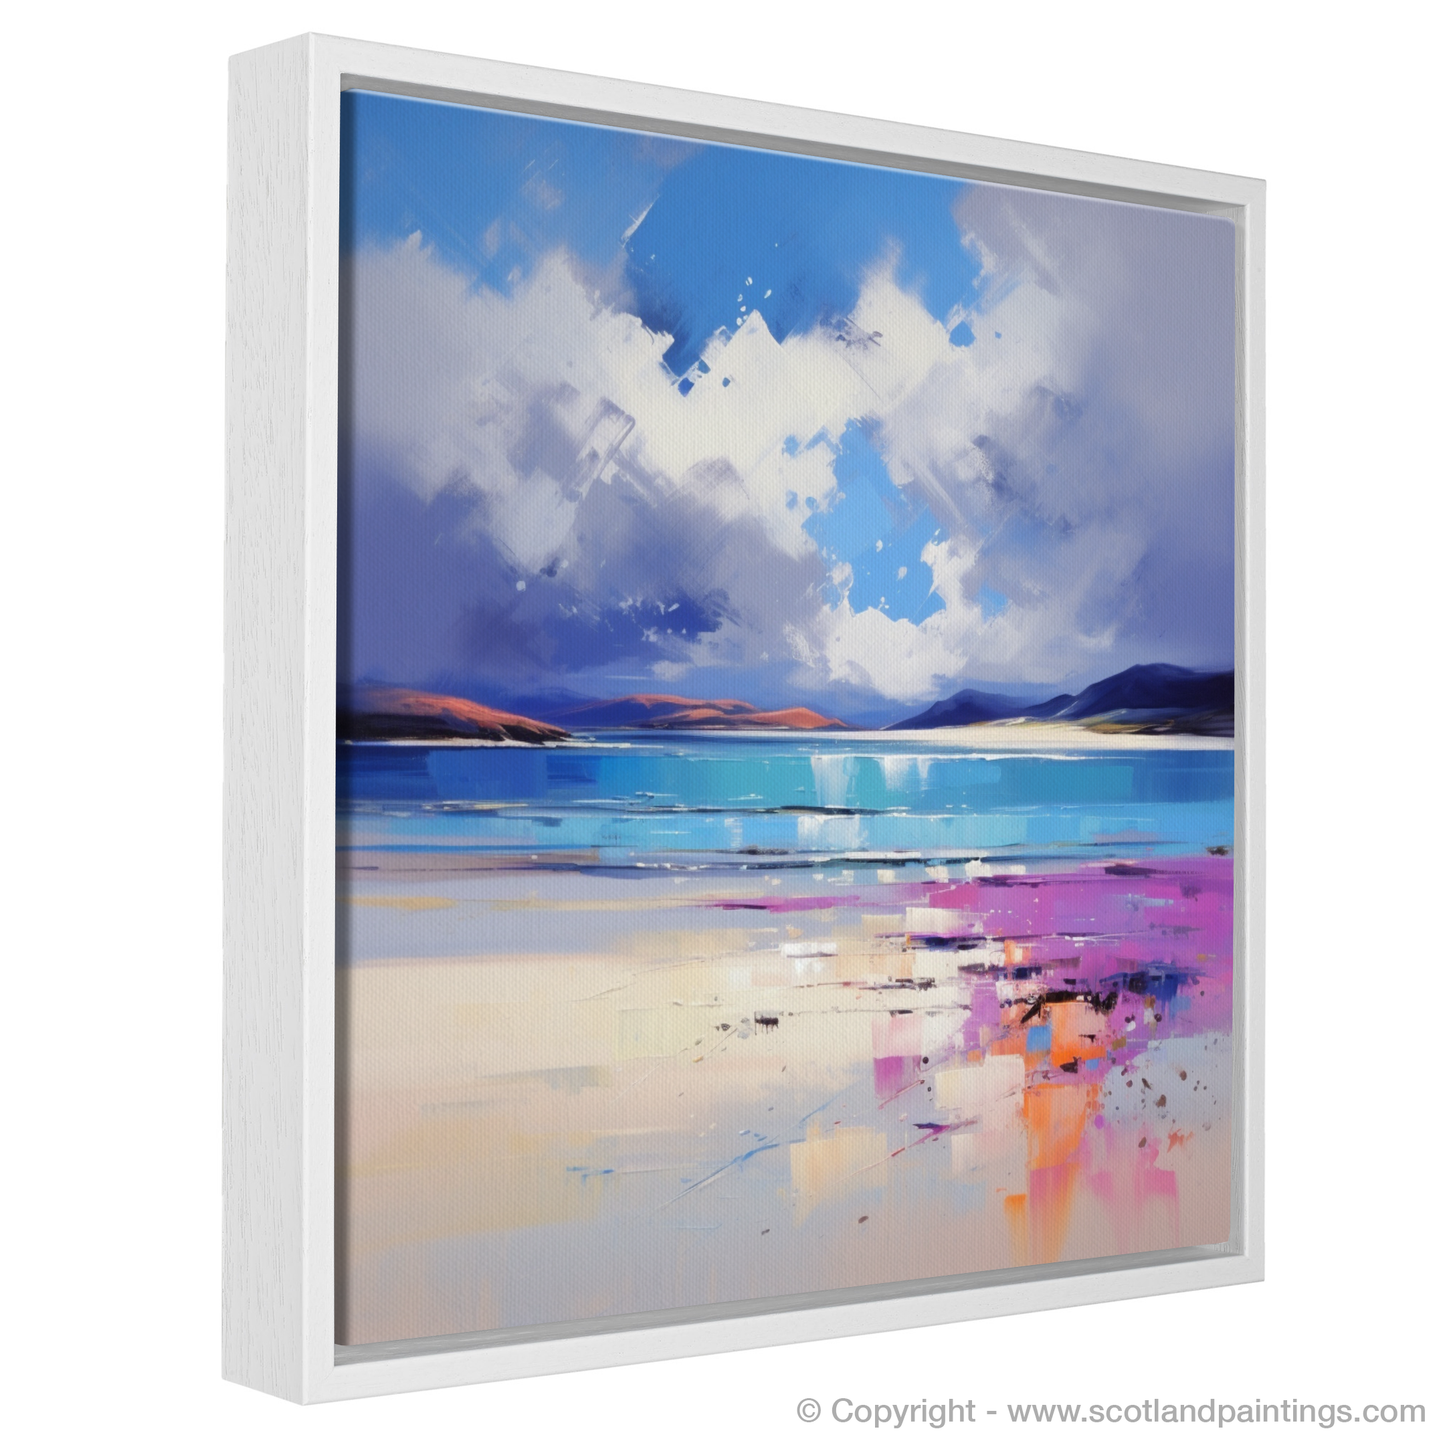 Painting and Art Print of Luskentyre Beach, Isle of Harris entitled "Luskentyre Dreamscape: An Expressionist Ode to Scottish Shores".